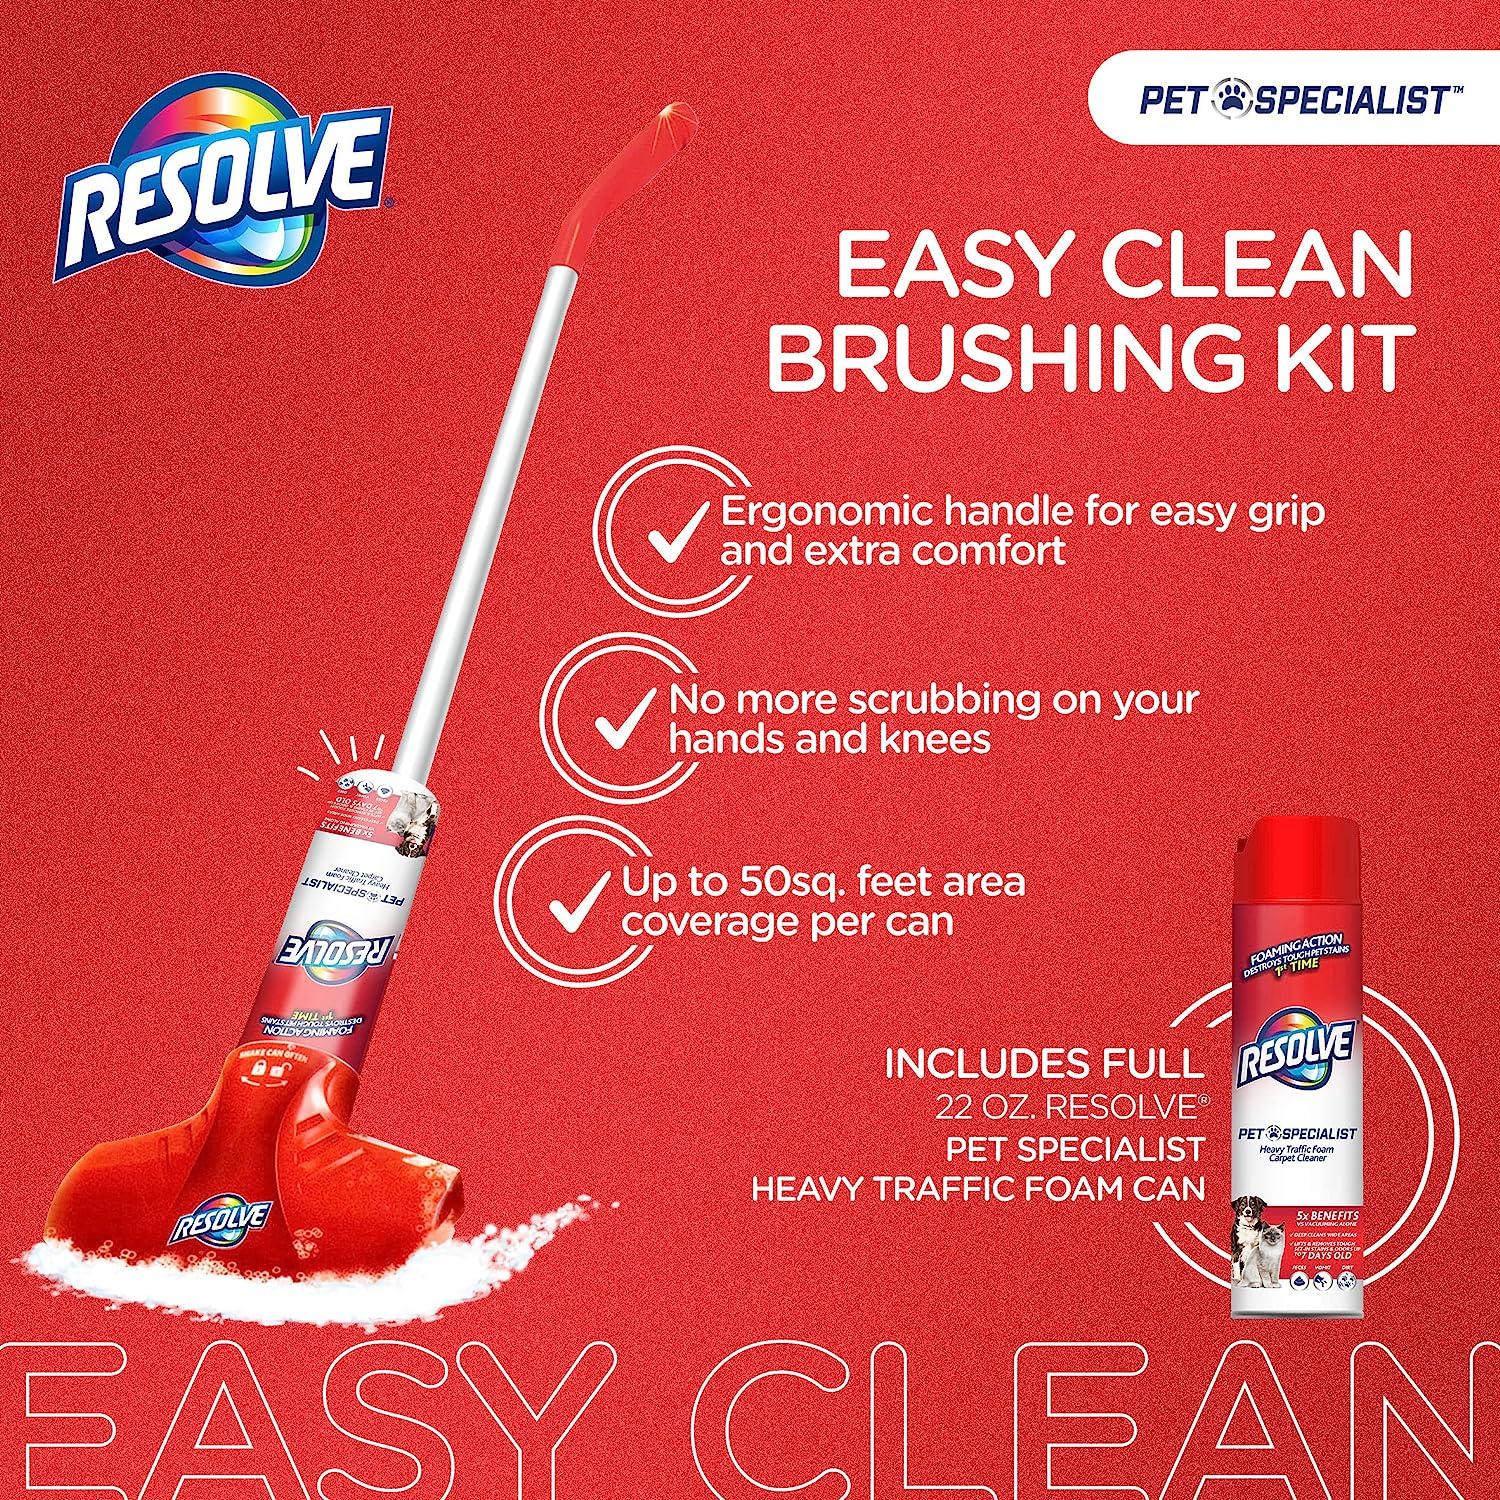 Resolve Pet Specialist Easy Clean Brushing Kit includes Heavy Traffic Foam  Carpet Cleaner, 22oz